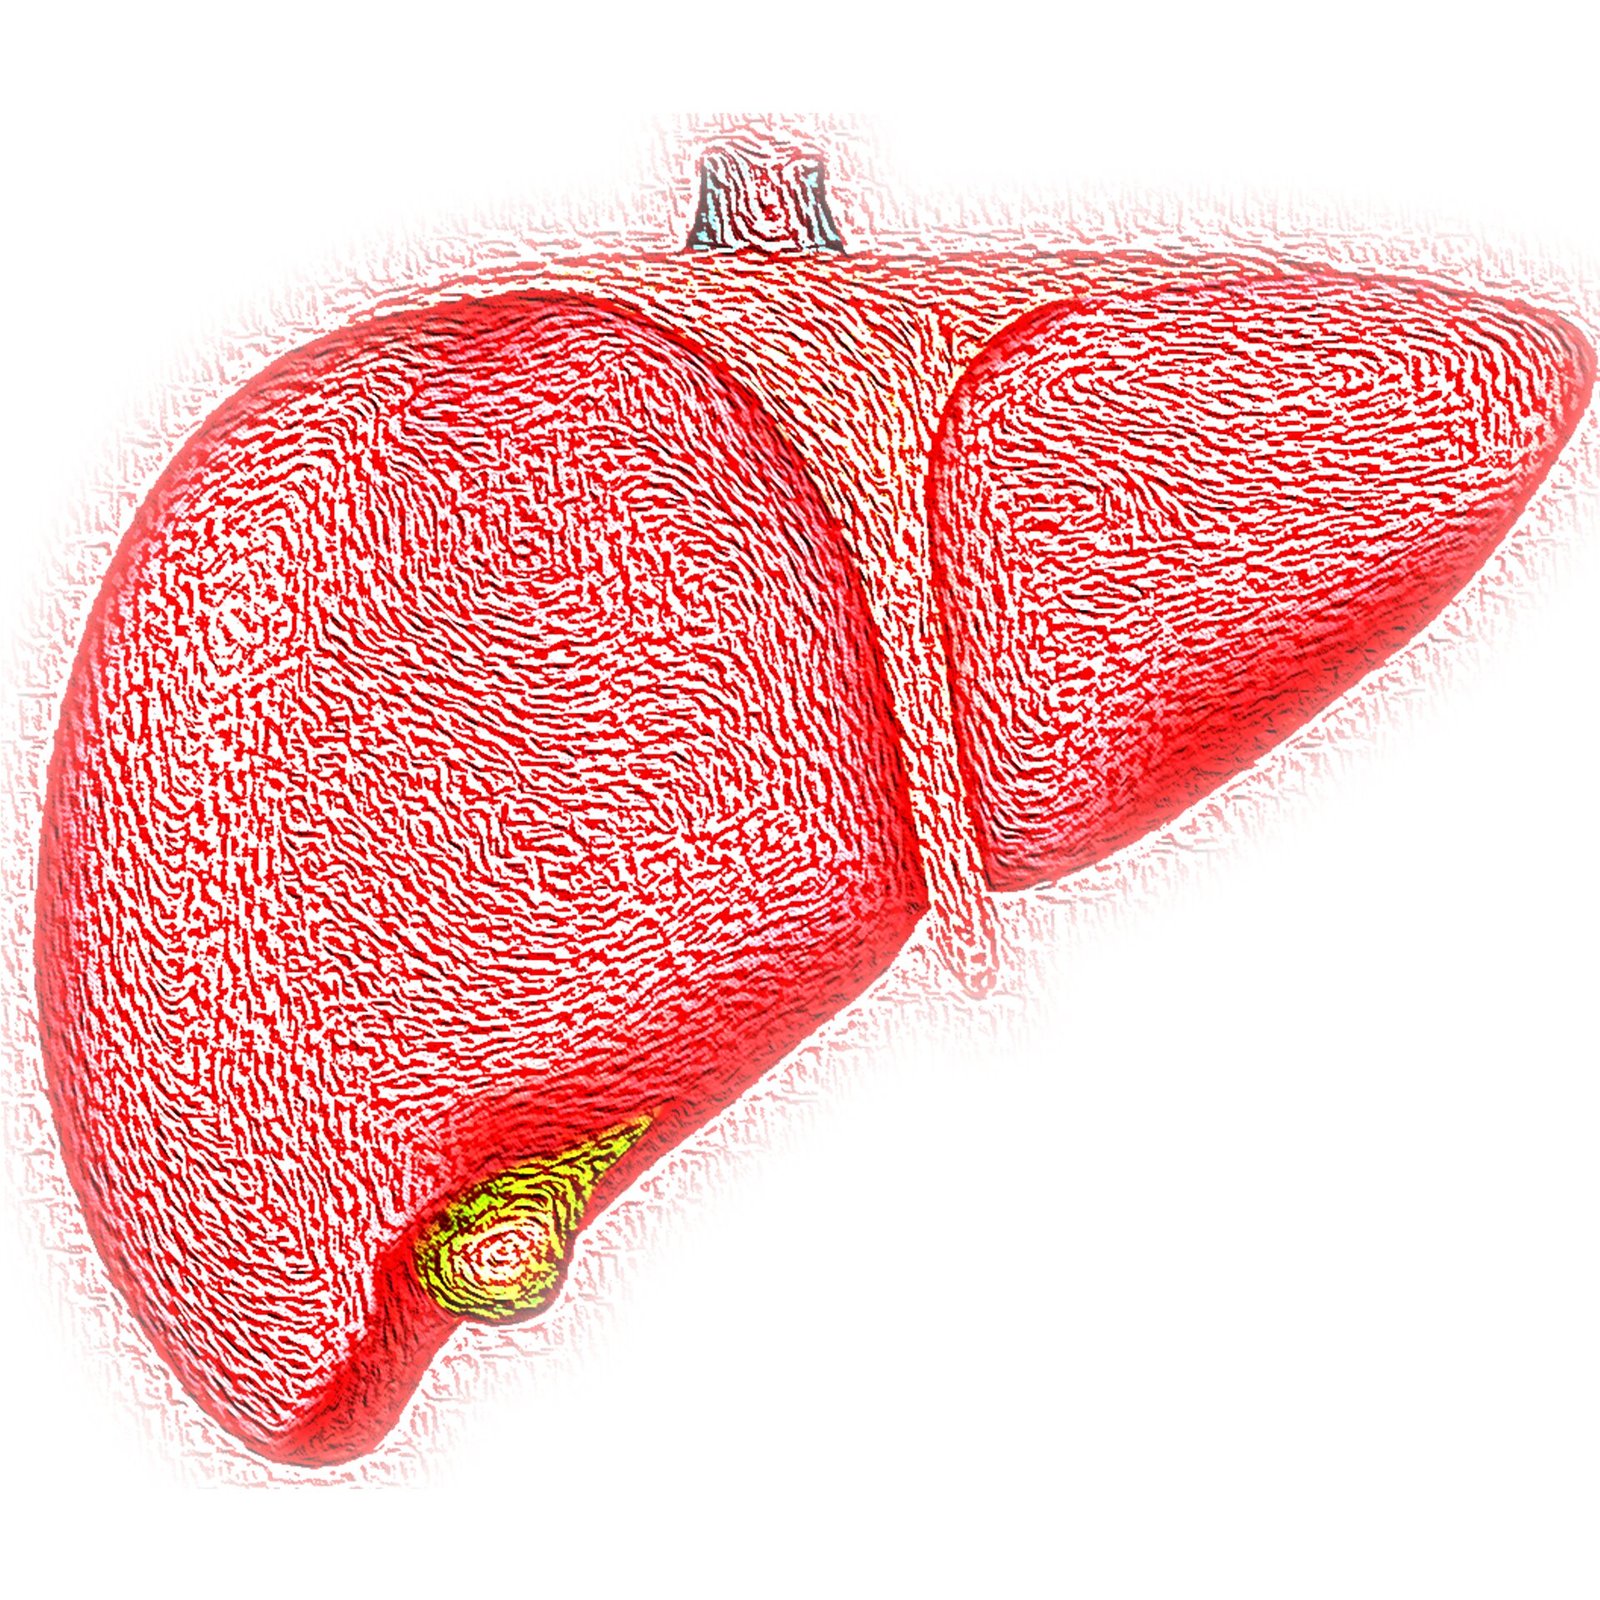 Study of cancer induced liver inflammation finds a promising therapeutic target